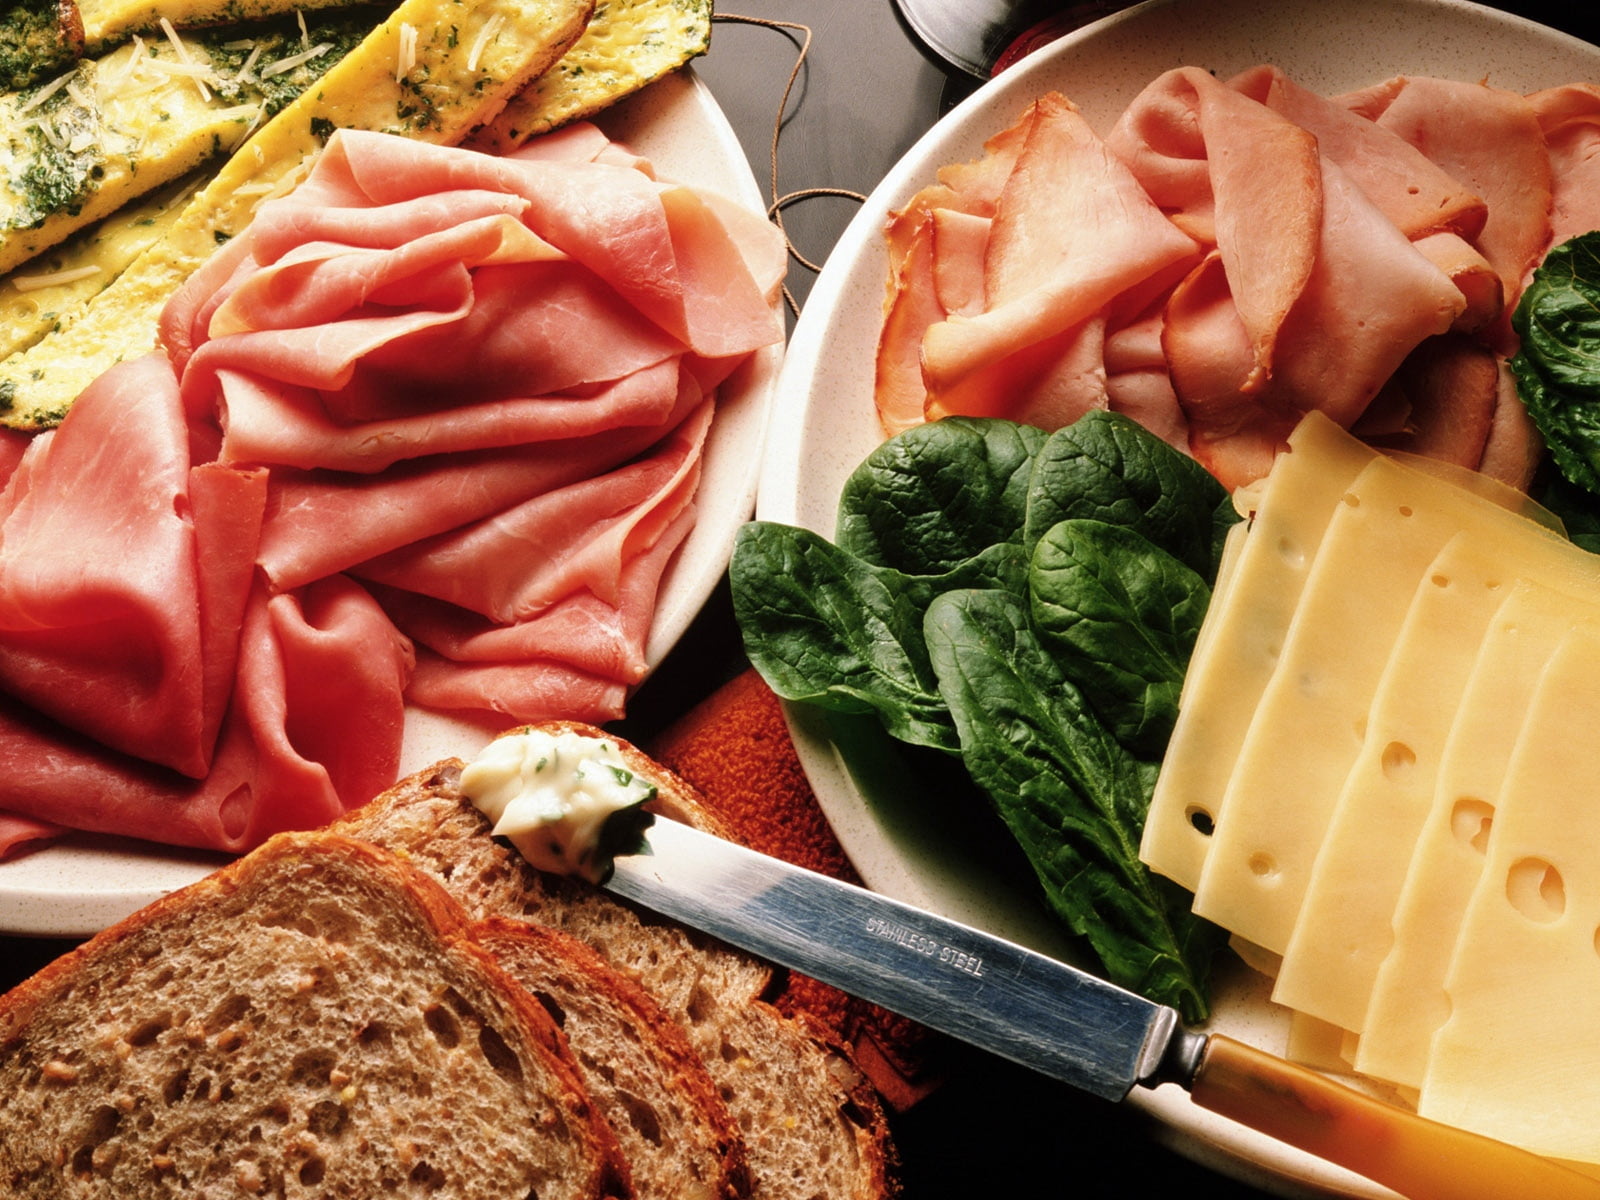 ham and sliced cheese, meat, slices, knife, bread, greens, food